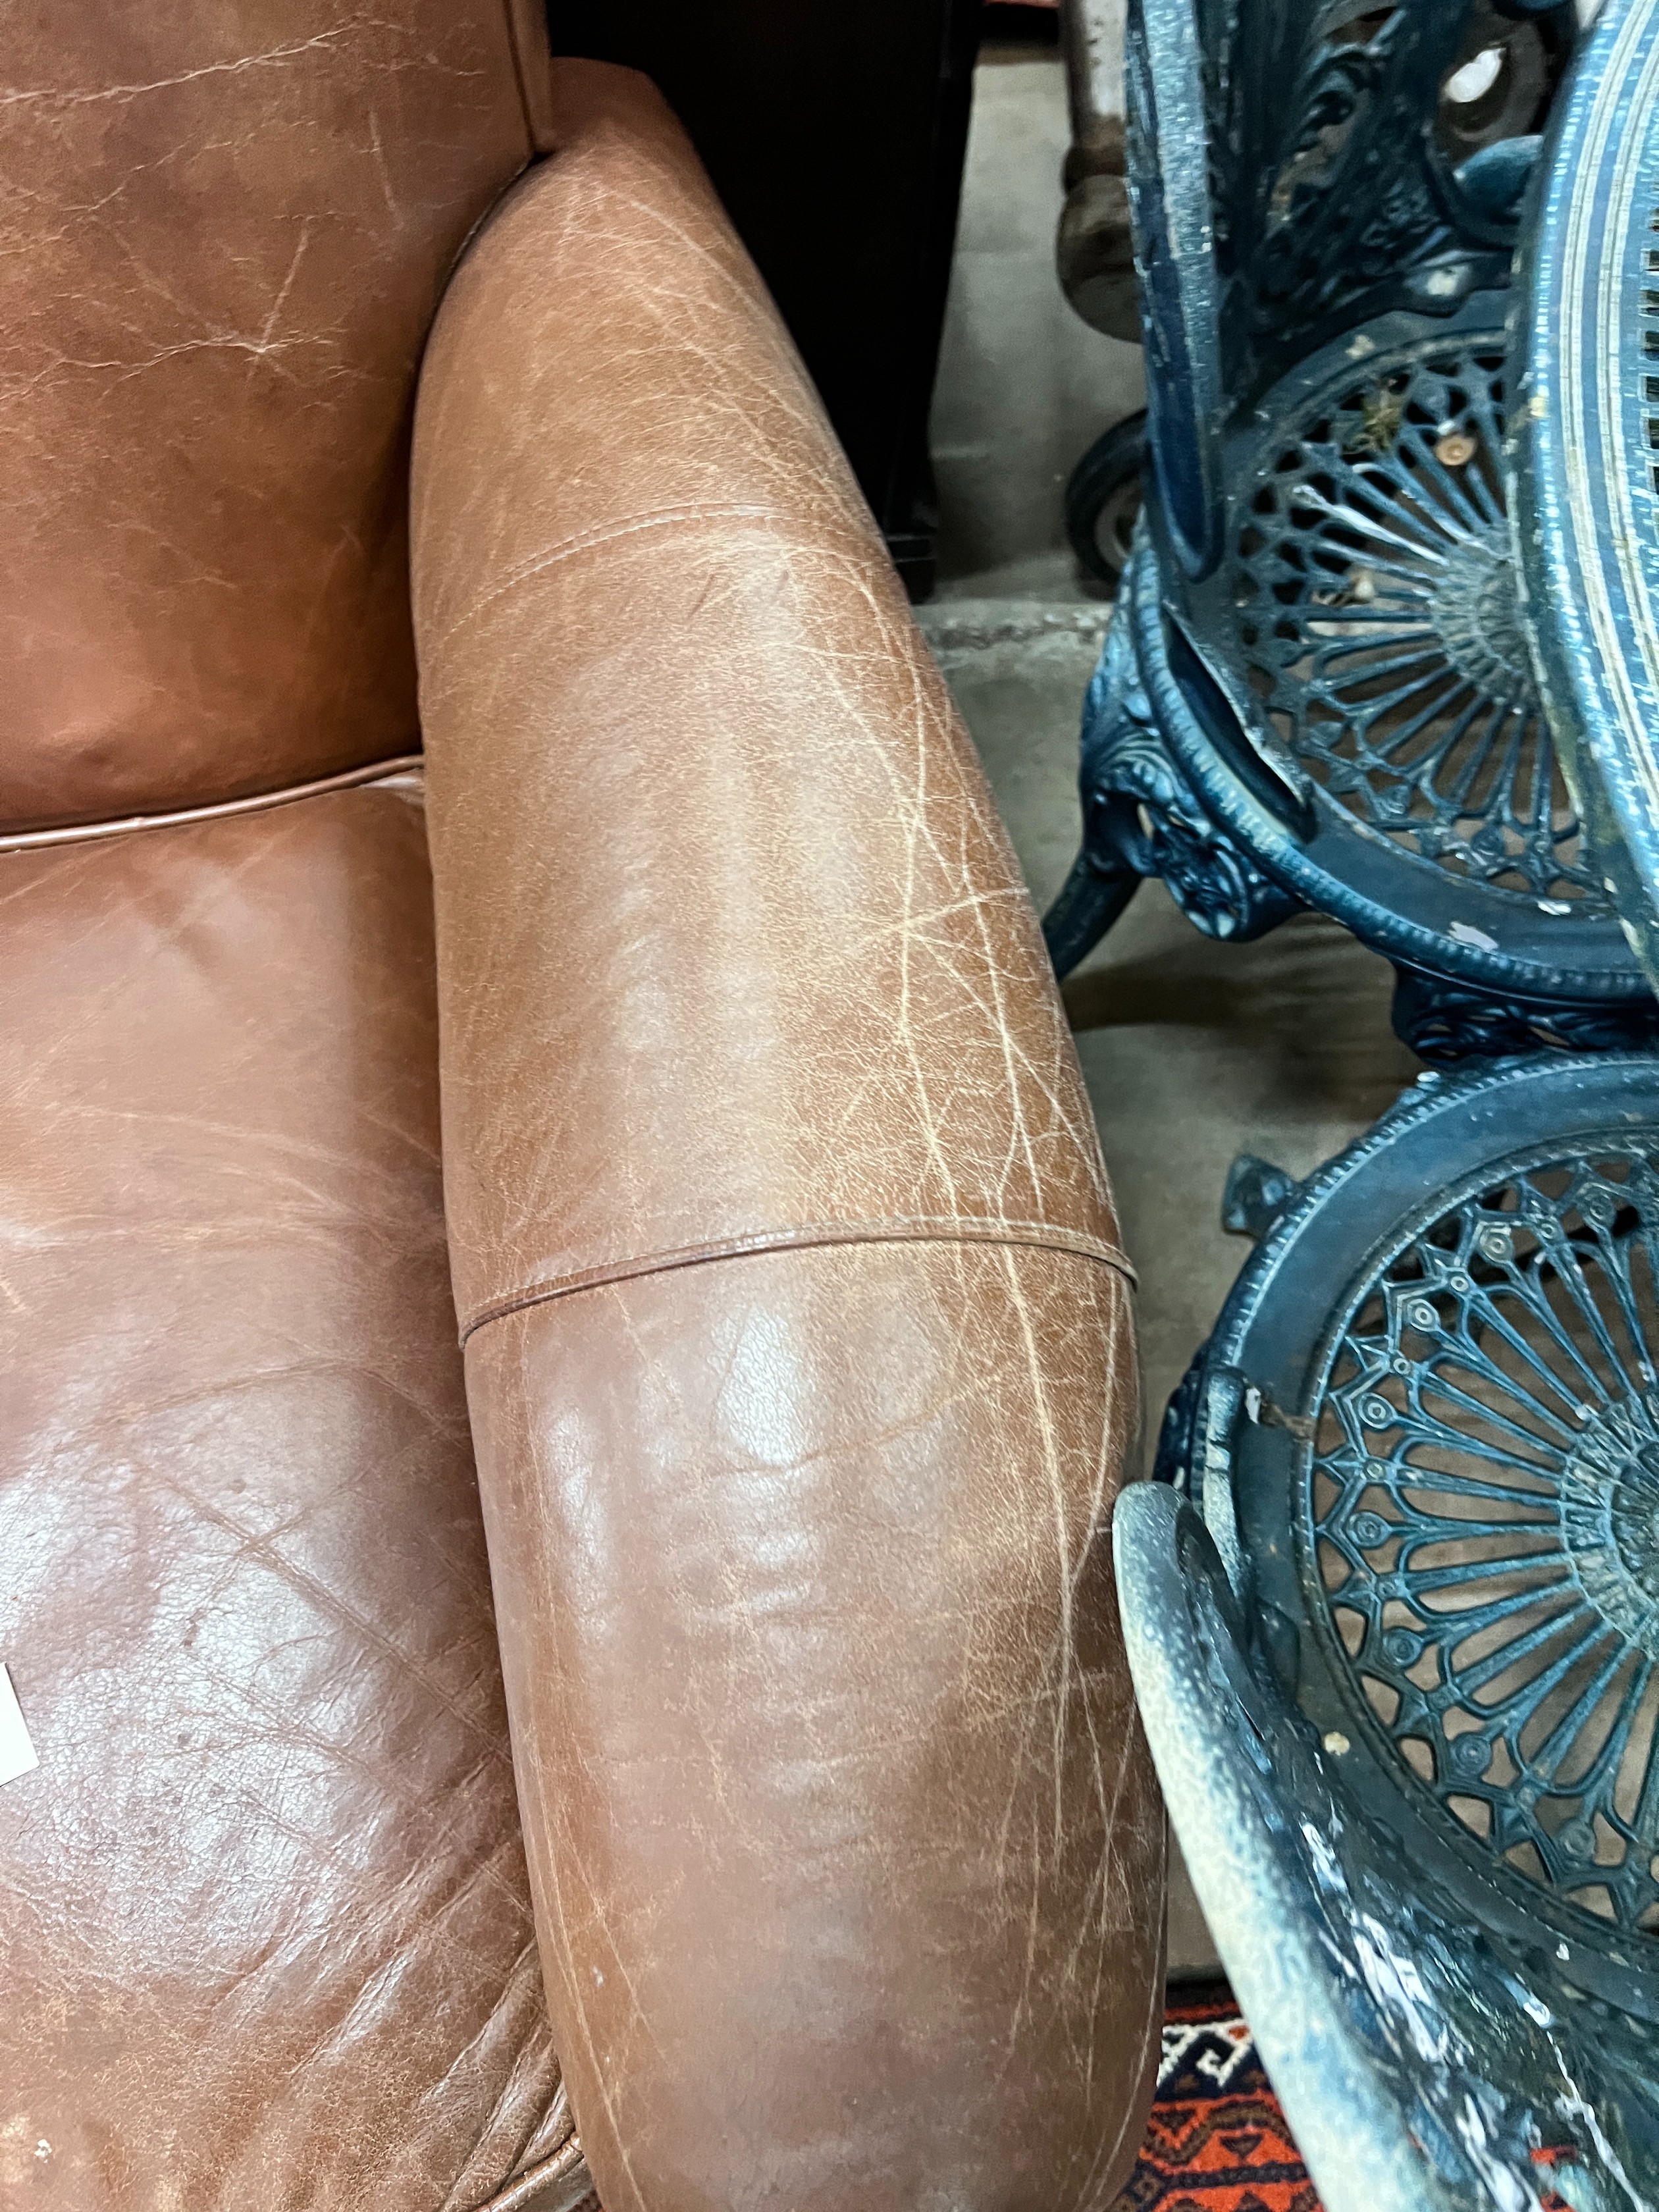 A contemporary tan leather reclining armchair with integral footrest, width 92cm, height 104cm *Please note the sale commences at 9am.